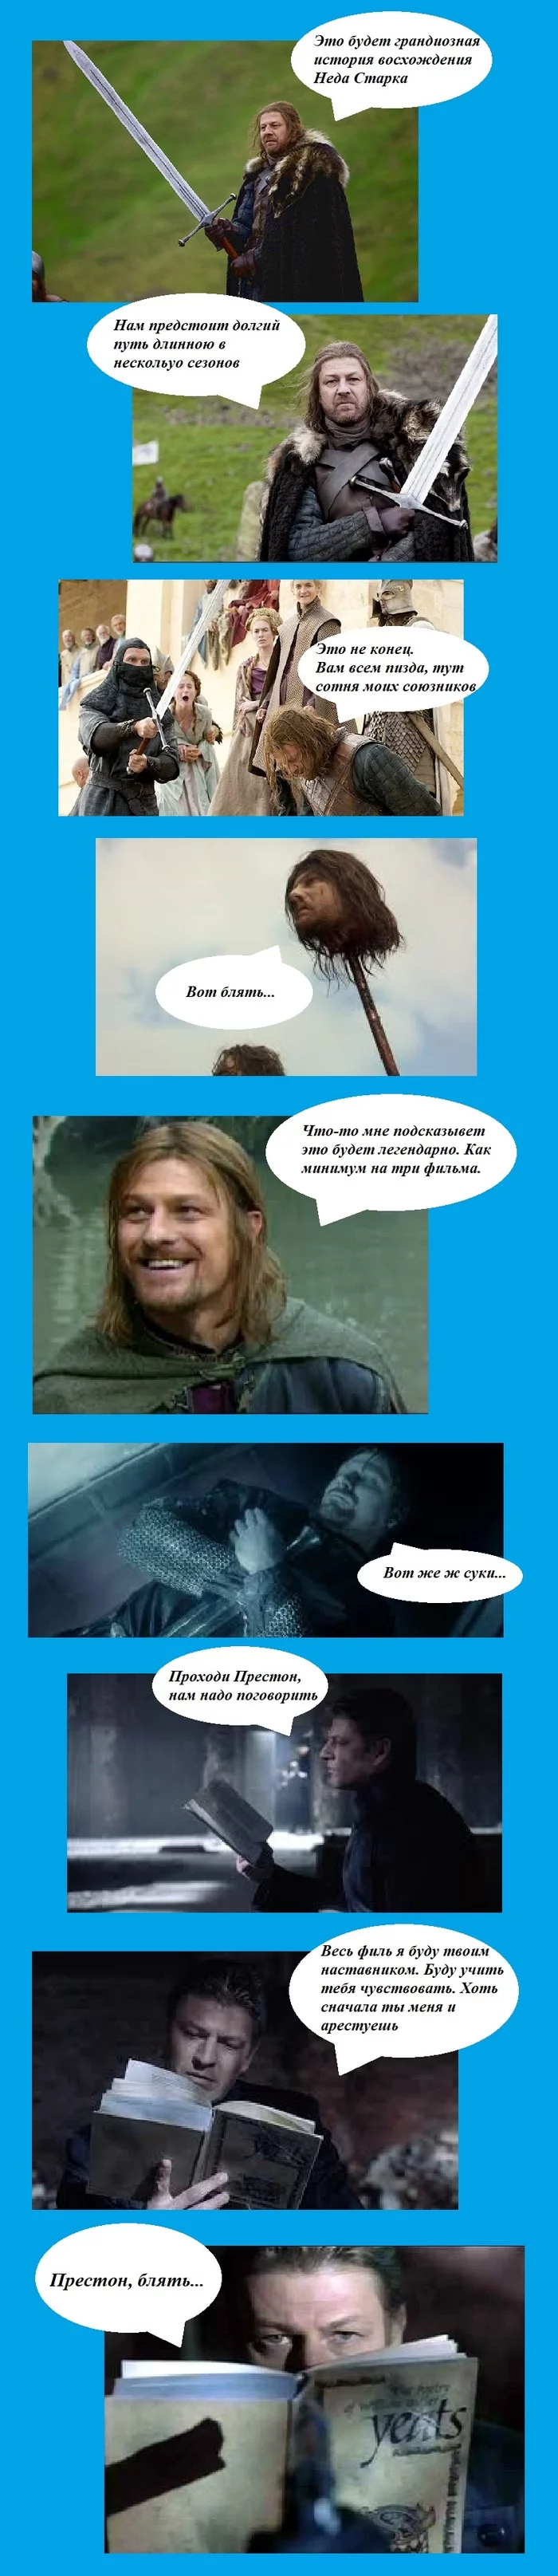 Your horse? Die! - My, Humor, Lord of the Rings, Game of Thrones, Equilibrium, Sean Bean, Movies, Mat, Longpost, Picture with text